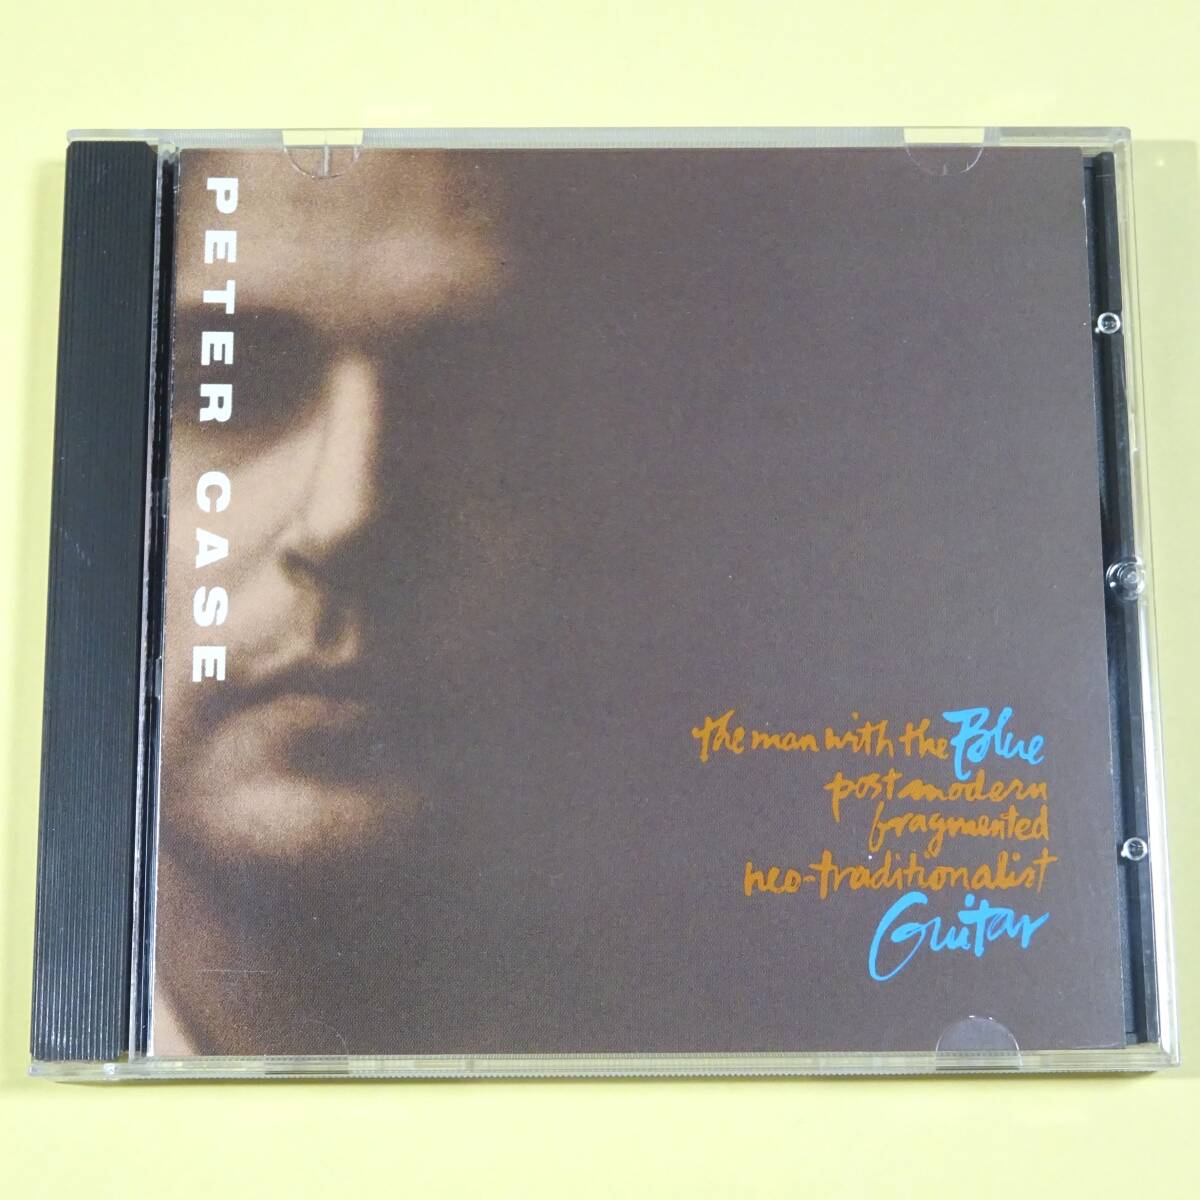 ◆CD　ピーター・ケイス / ブルー・ギター　PETER CASE / THE MAN WITH THE BLUE POSTMODERN FRAGMENTED NEO-TRADITIONALIST GUITAR 1989年_画像1